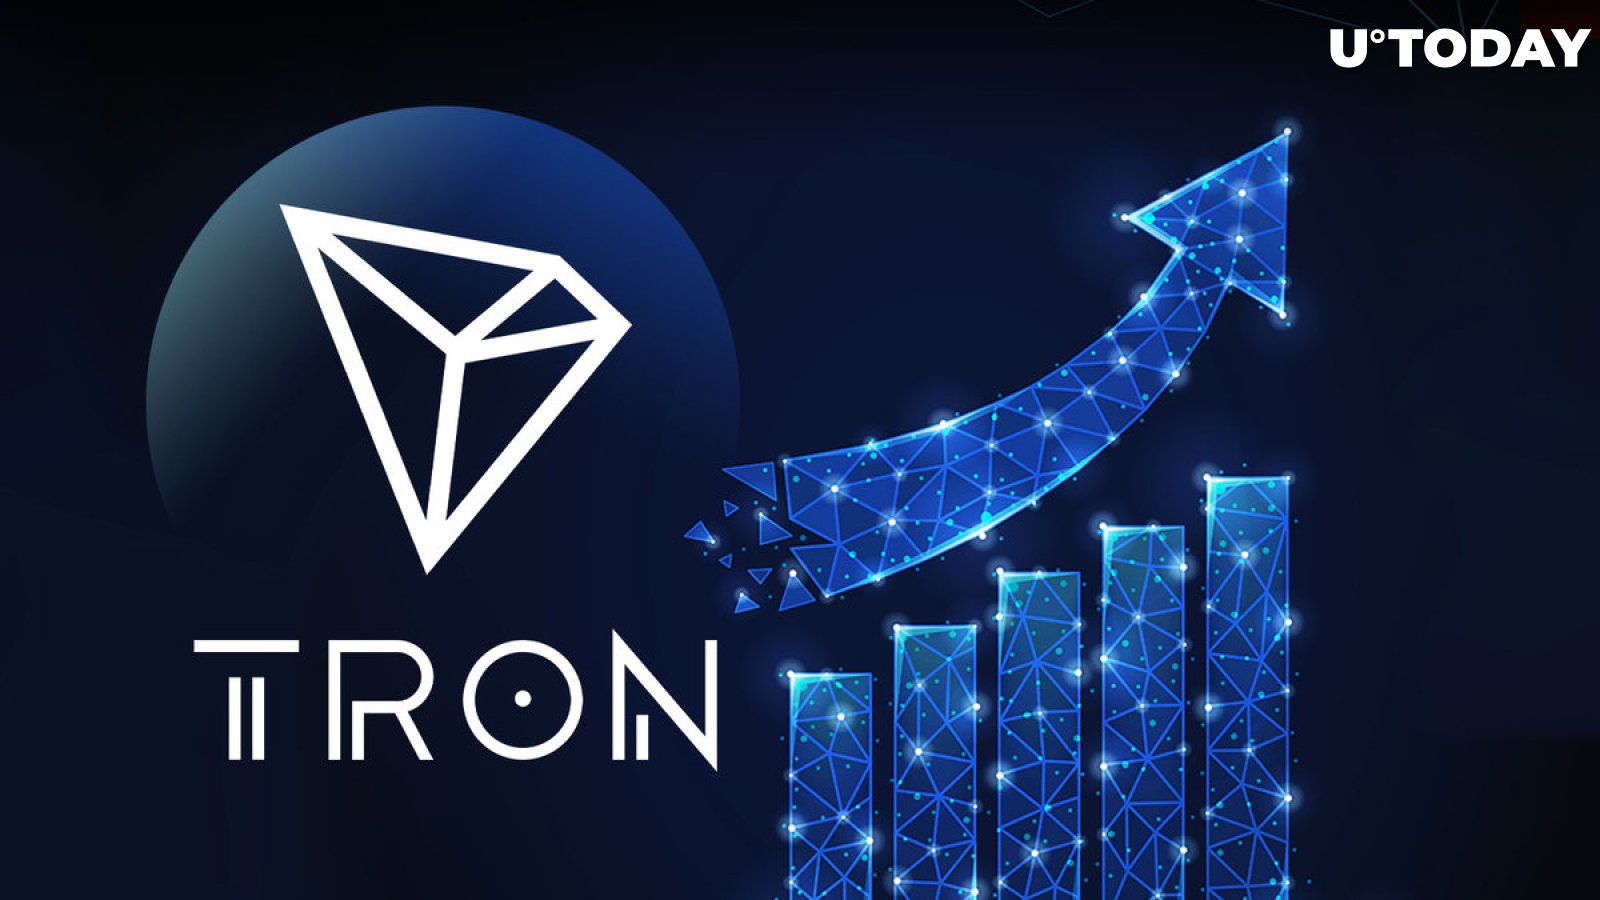 TRON News: Latest News and Updates on TRX